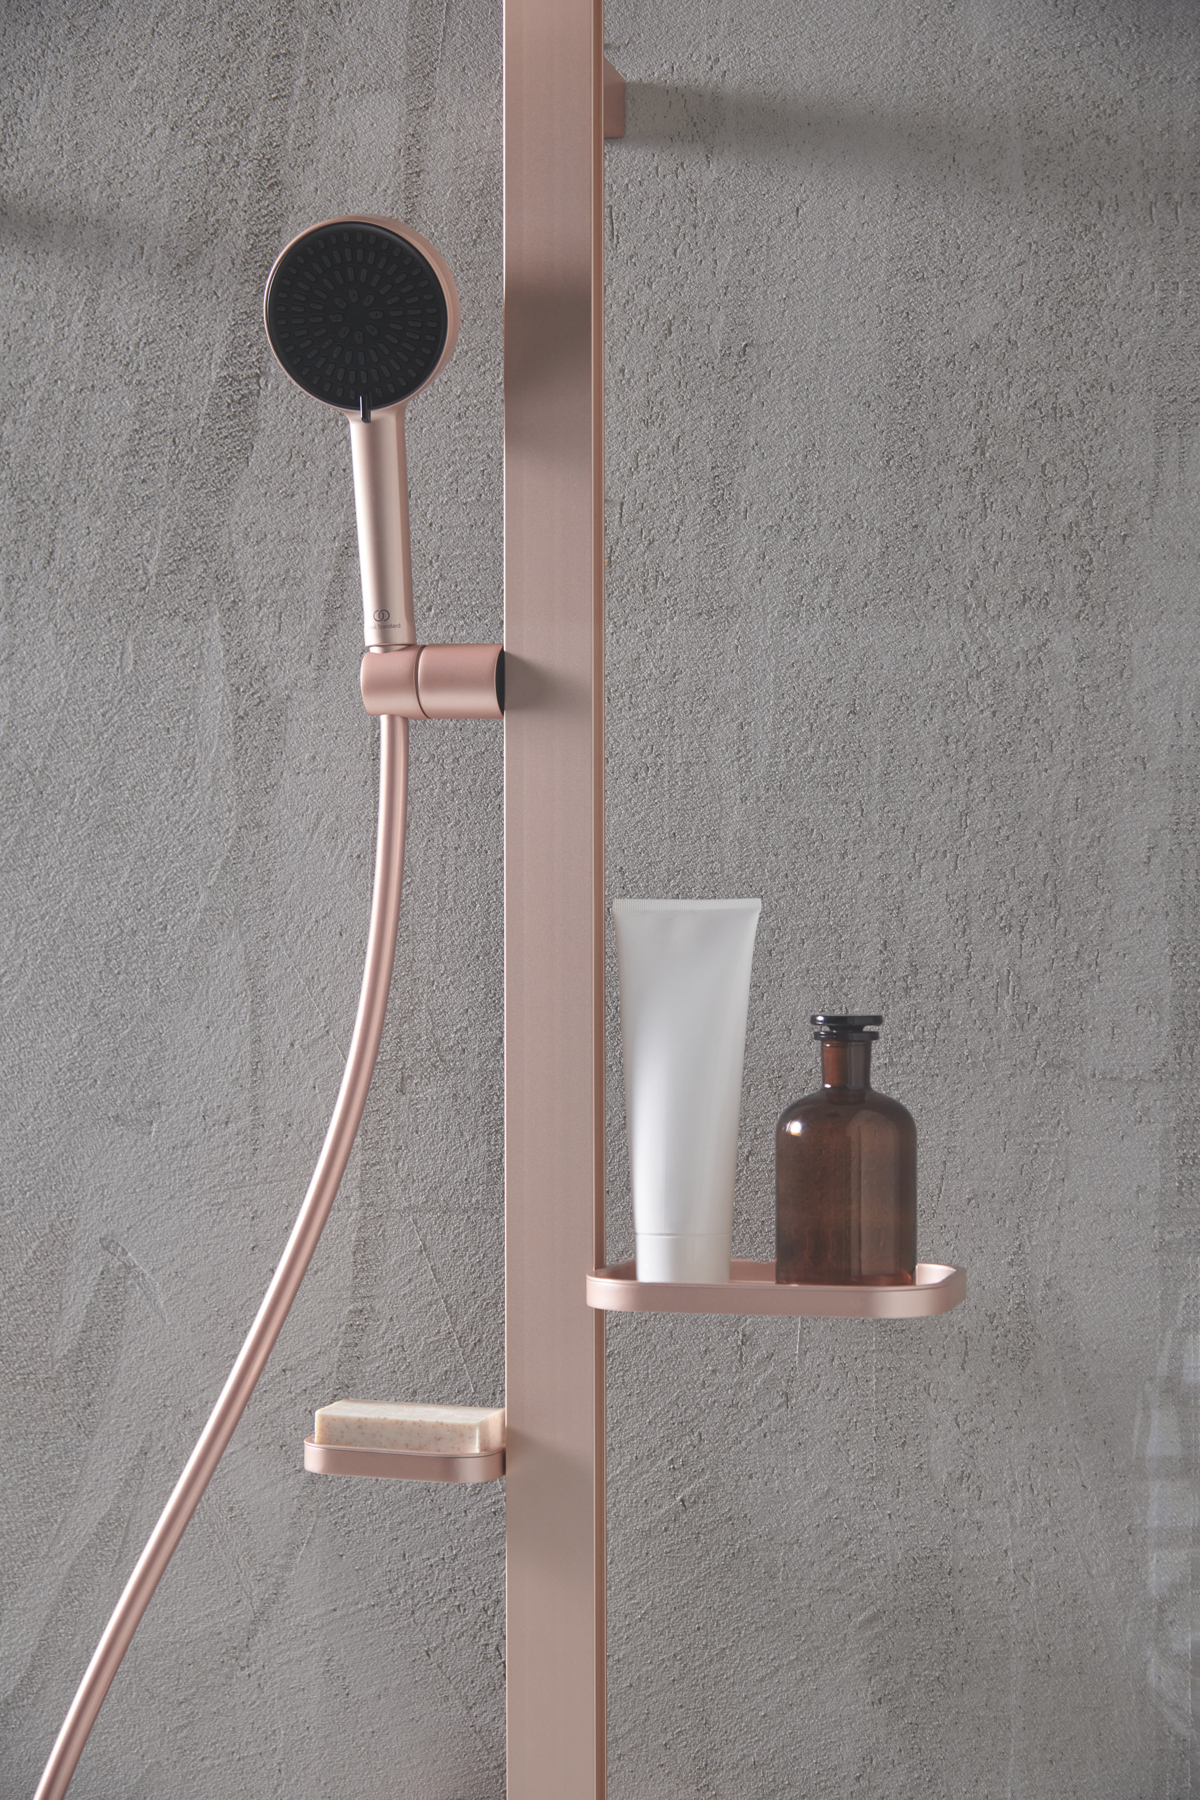 rose gold shower unit with shelving integrated for bottles and shampoo